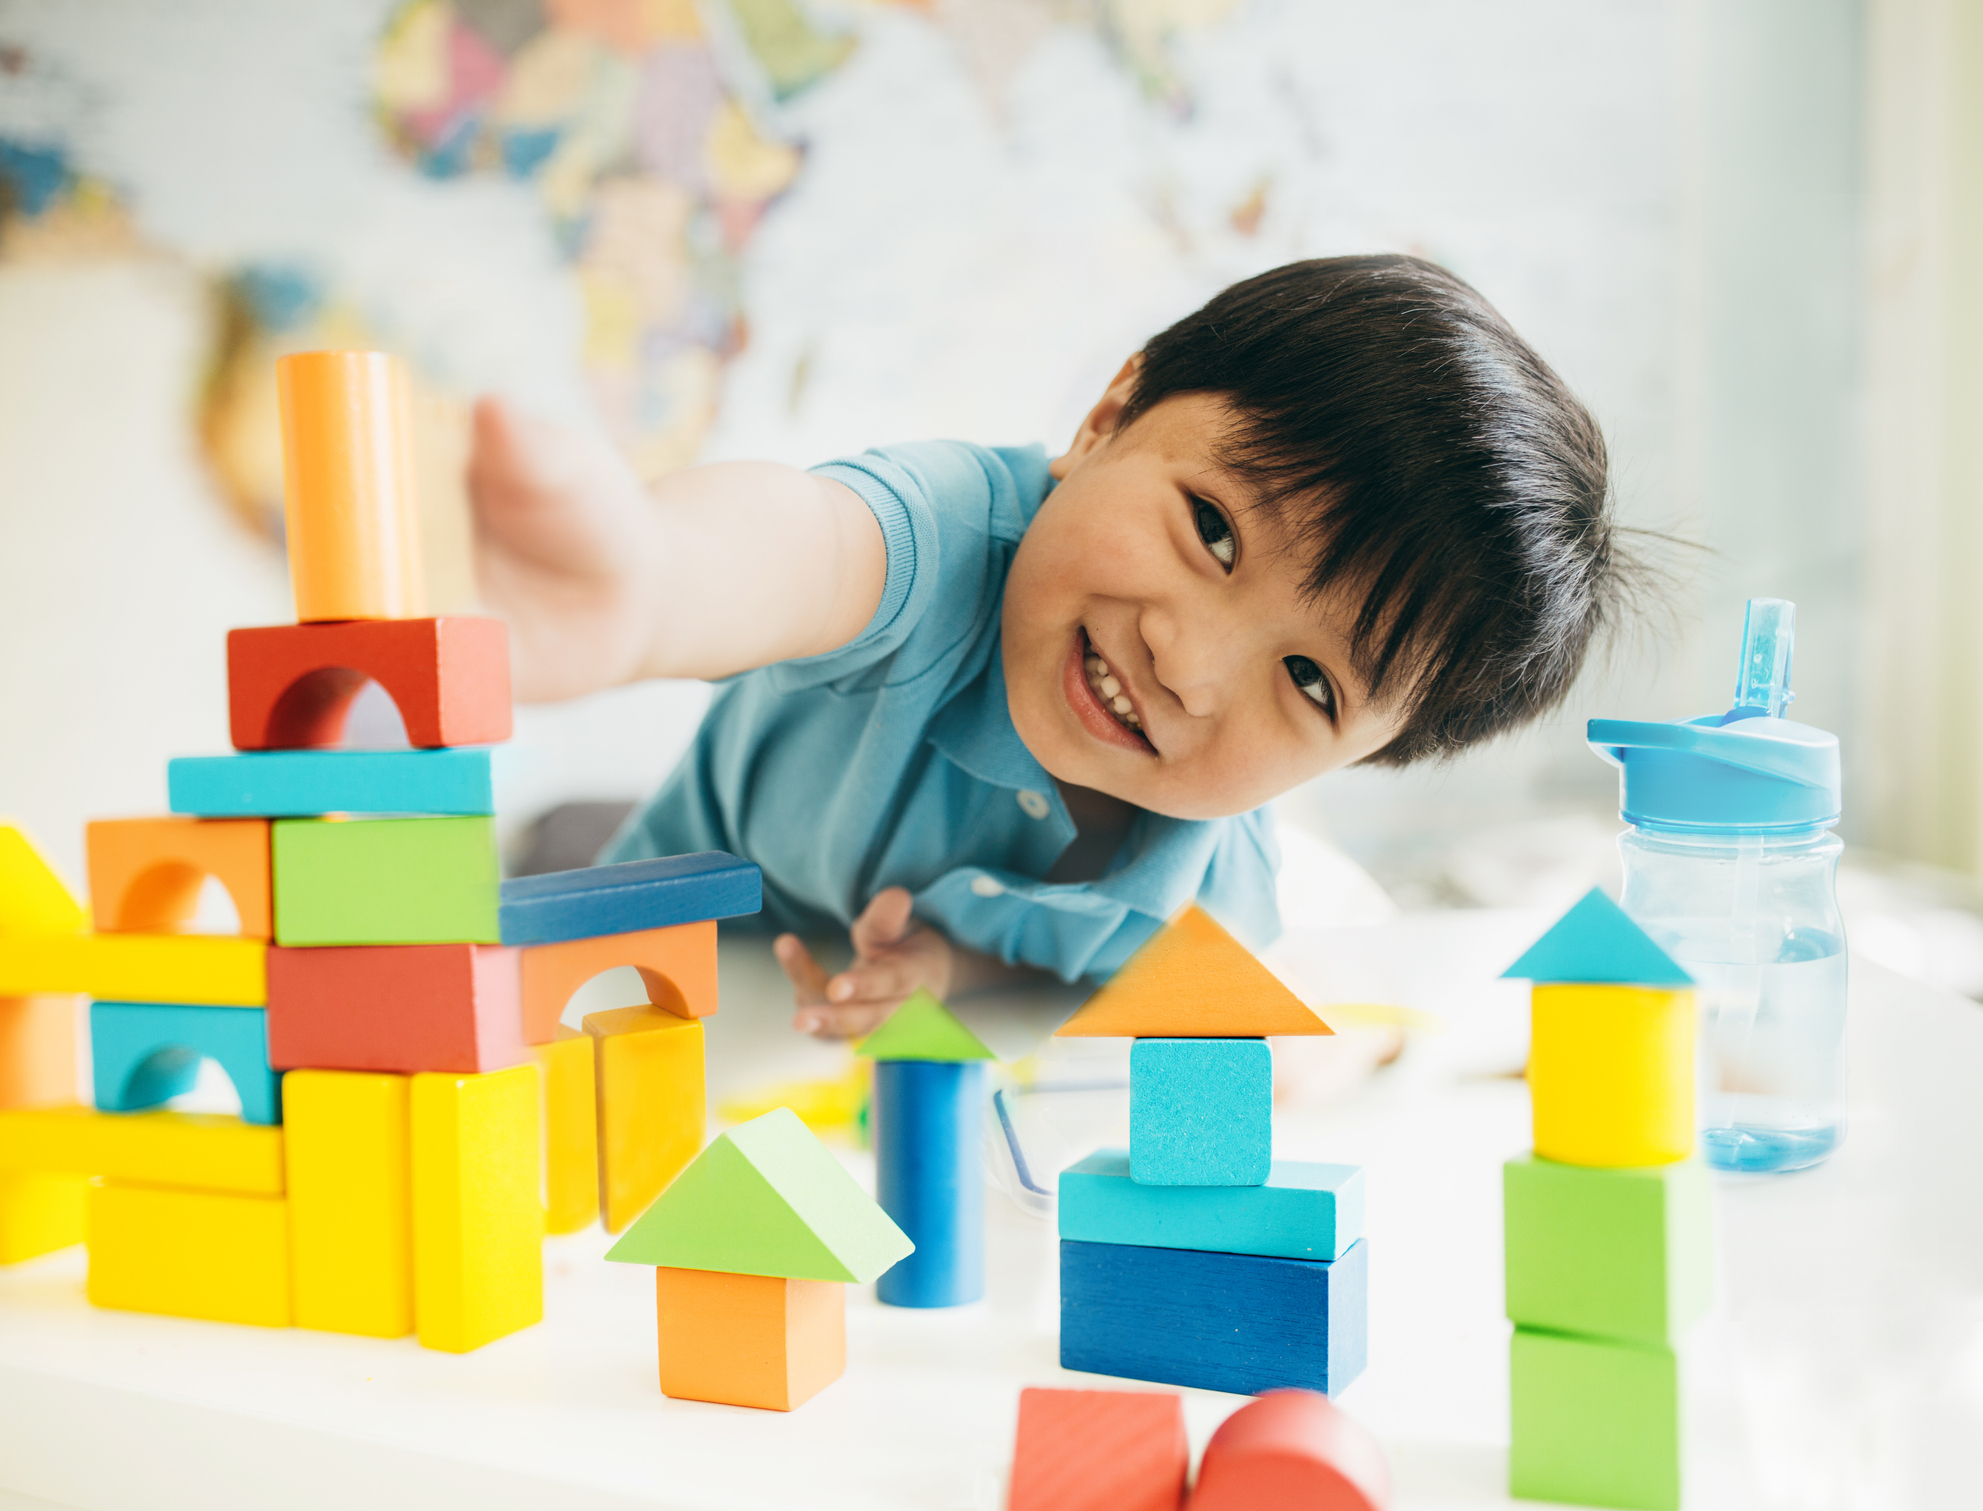 5 important things to have at a child development center by Children’s Learning Adventure